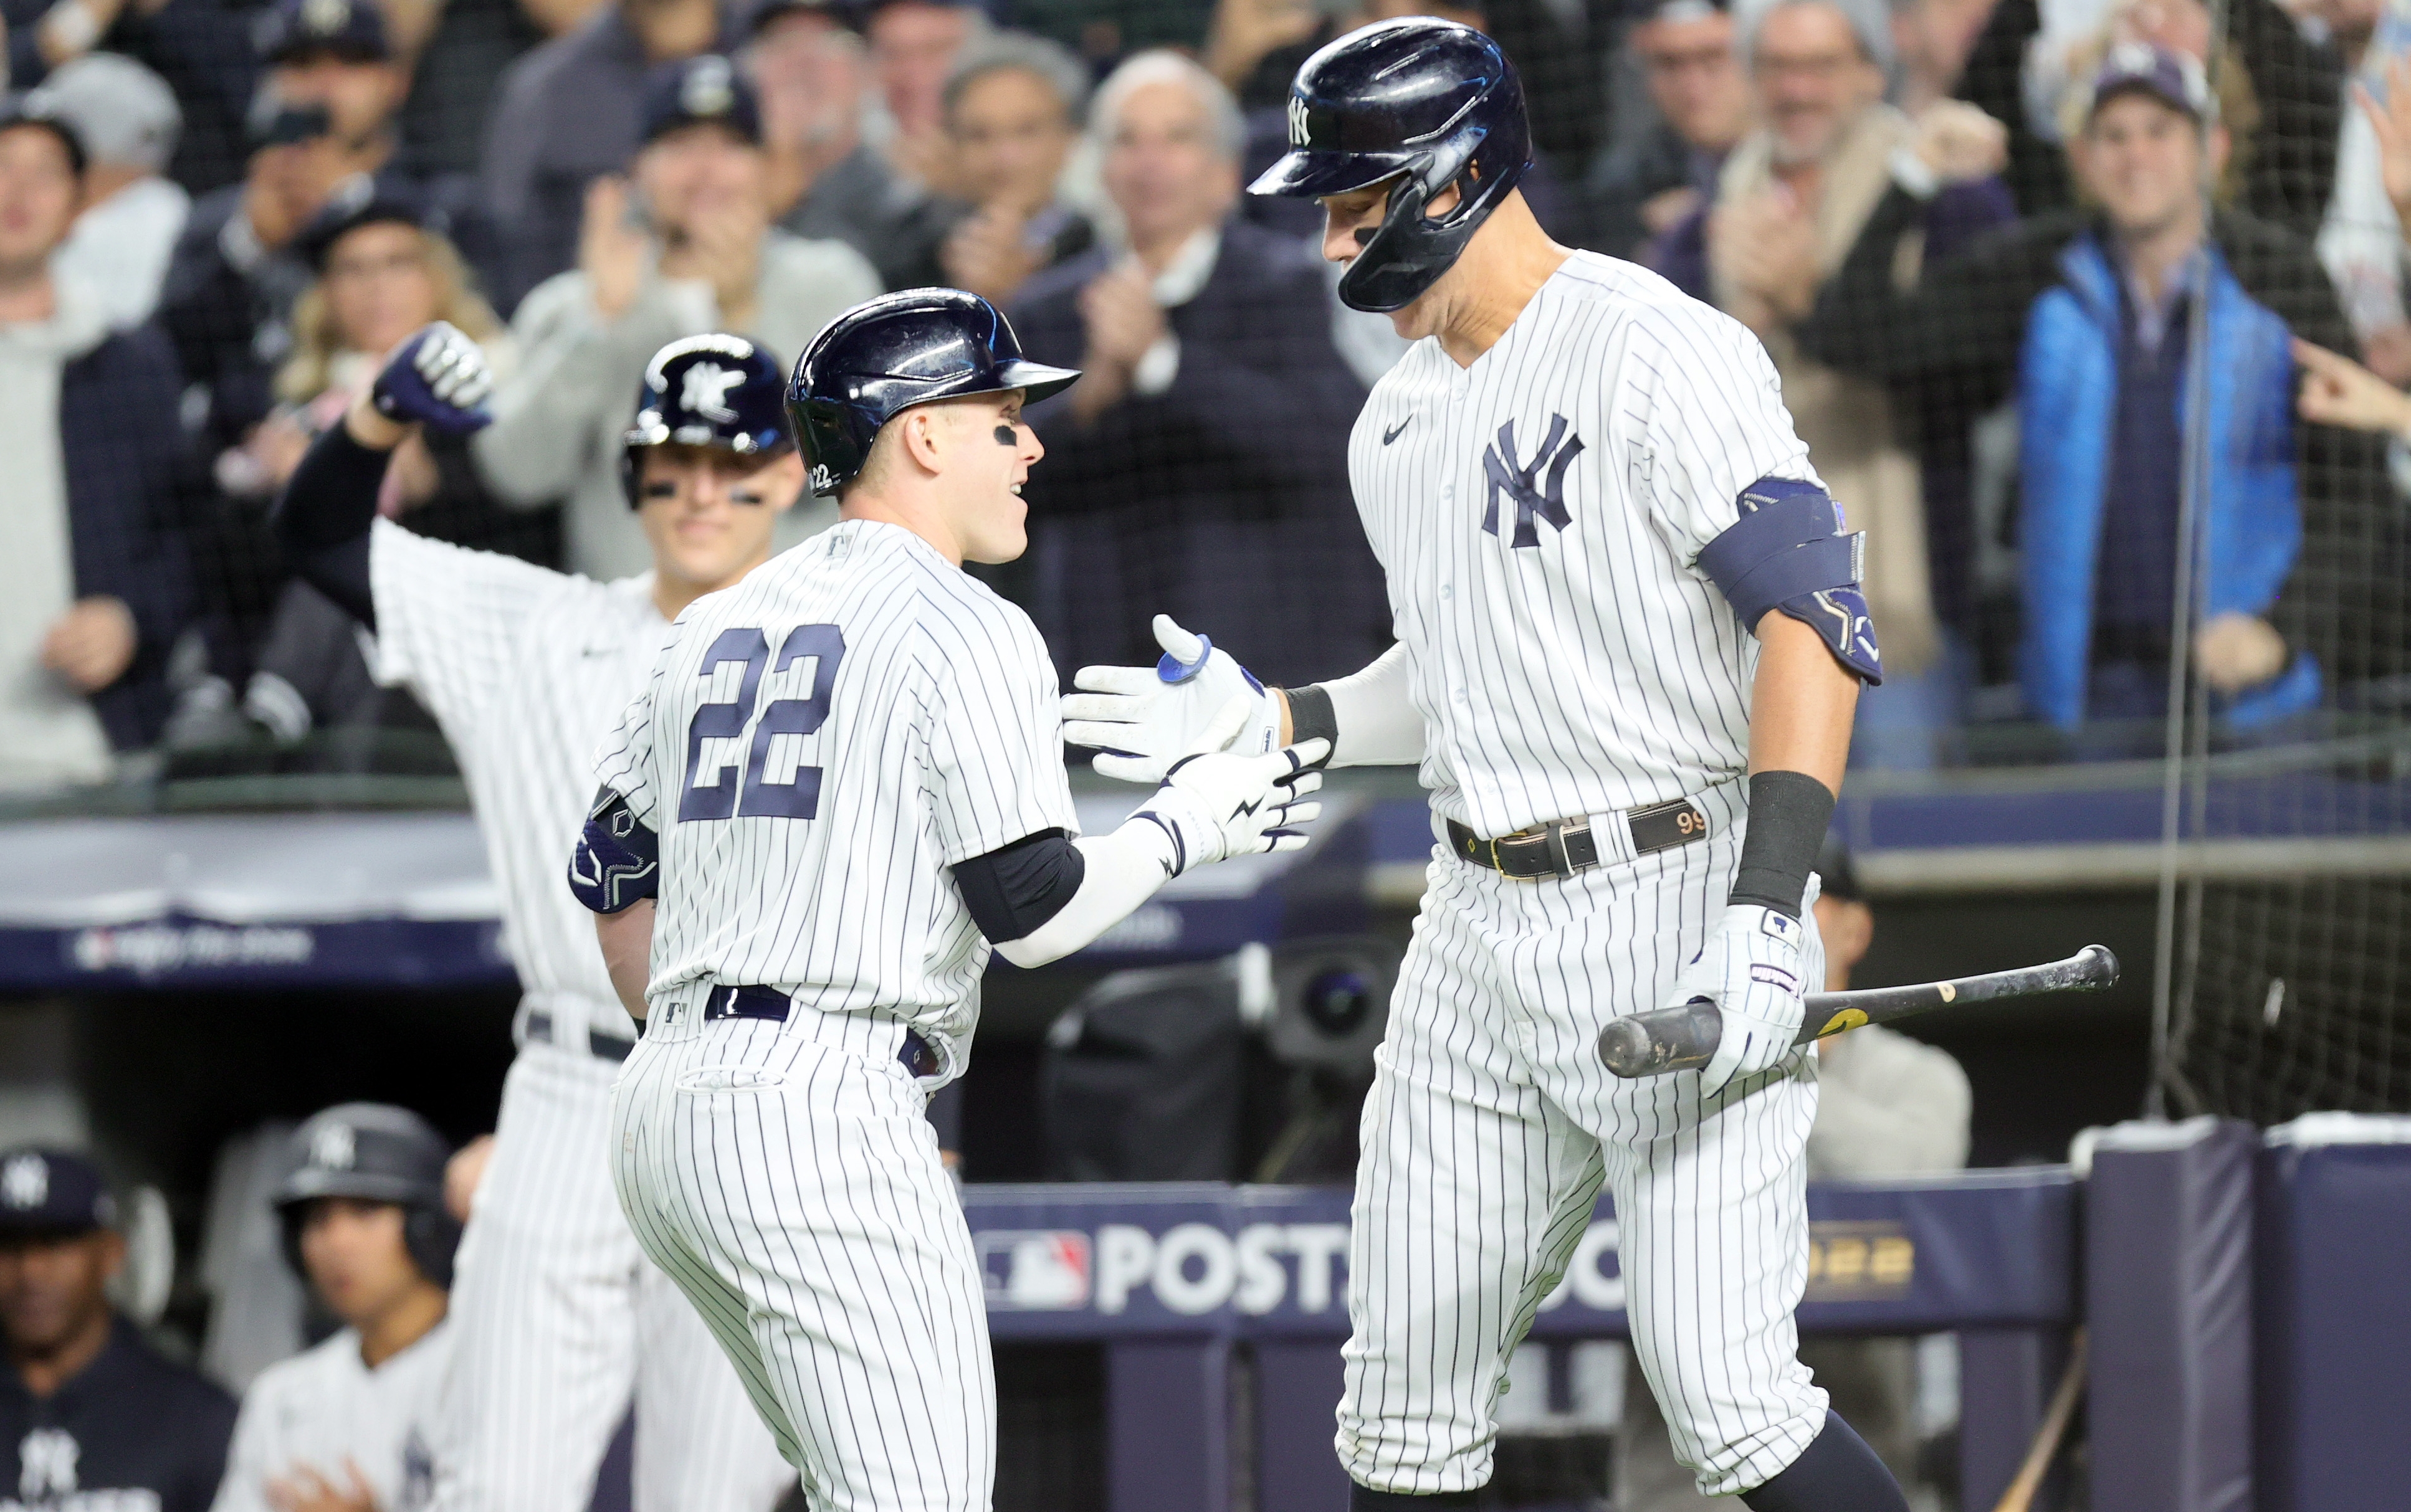 Yankees ALCS tickets: The cheapest tickets available for upcoming